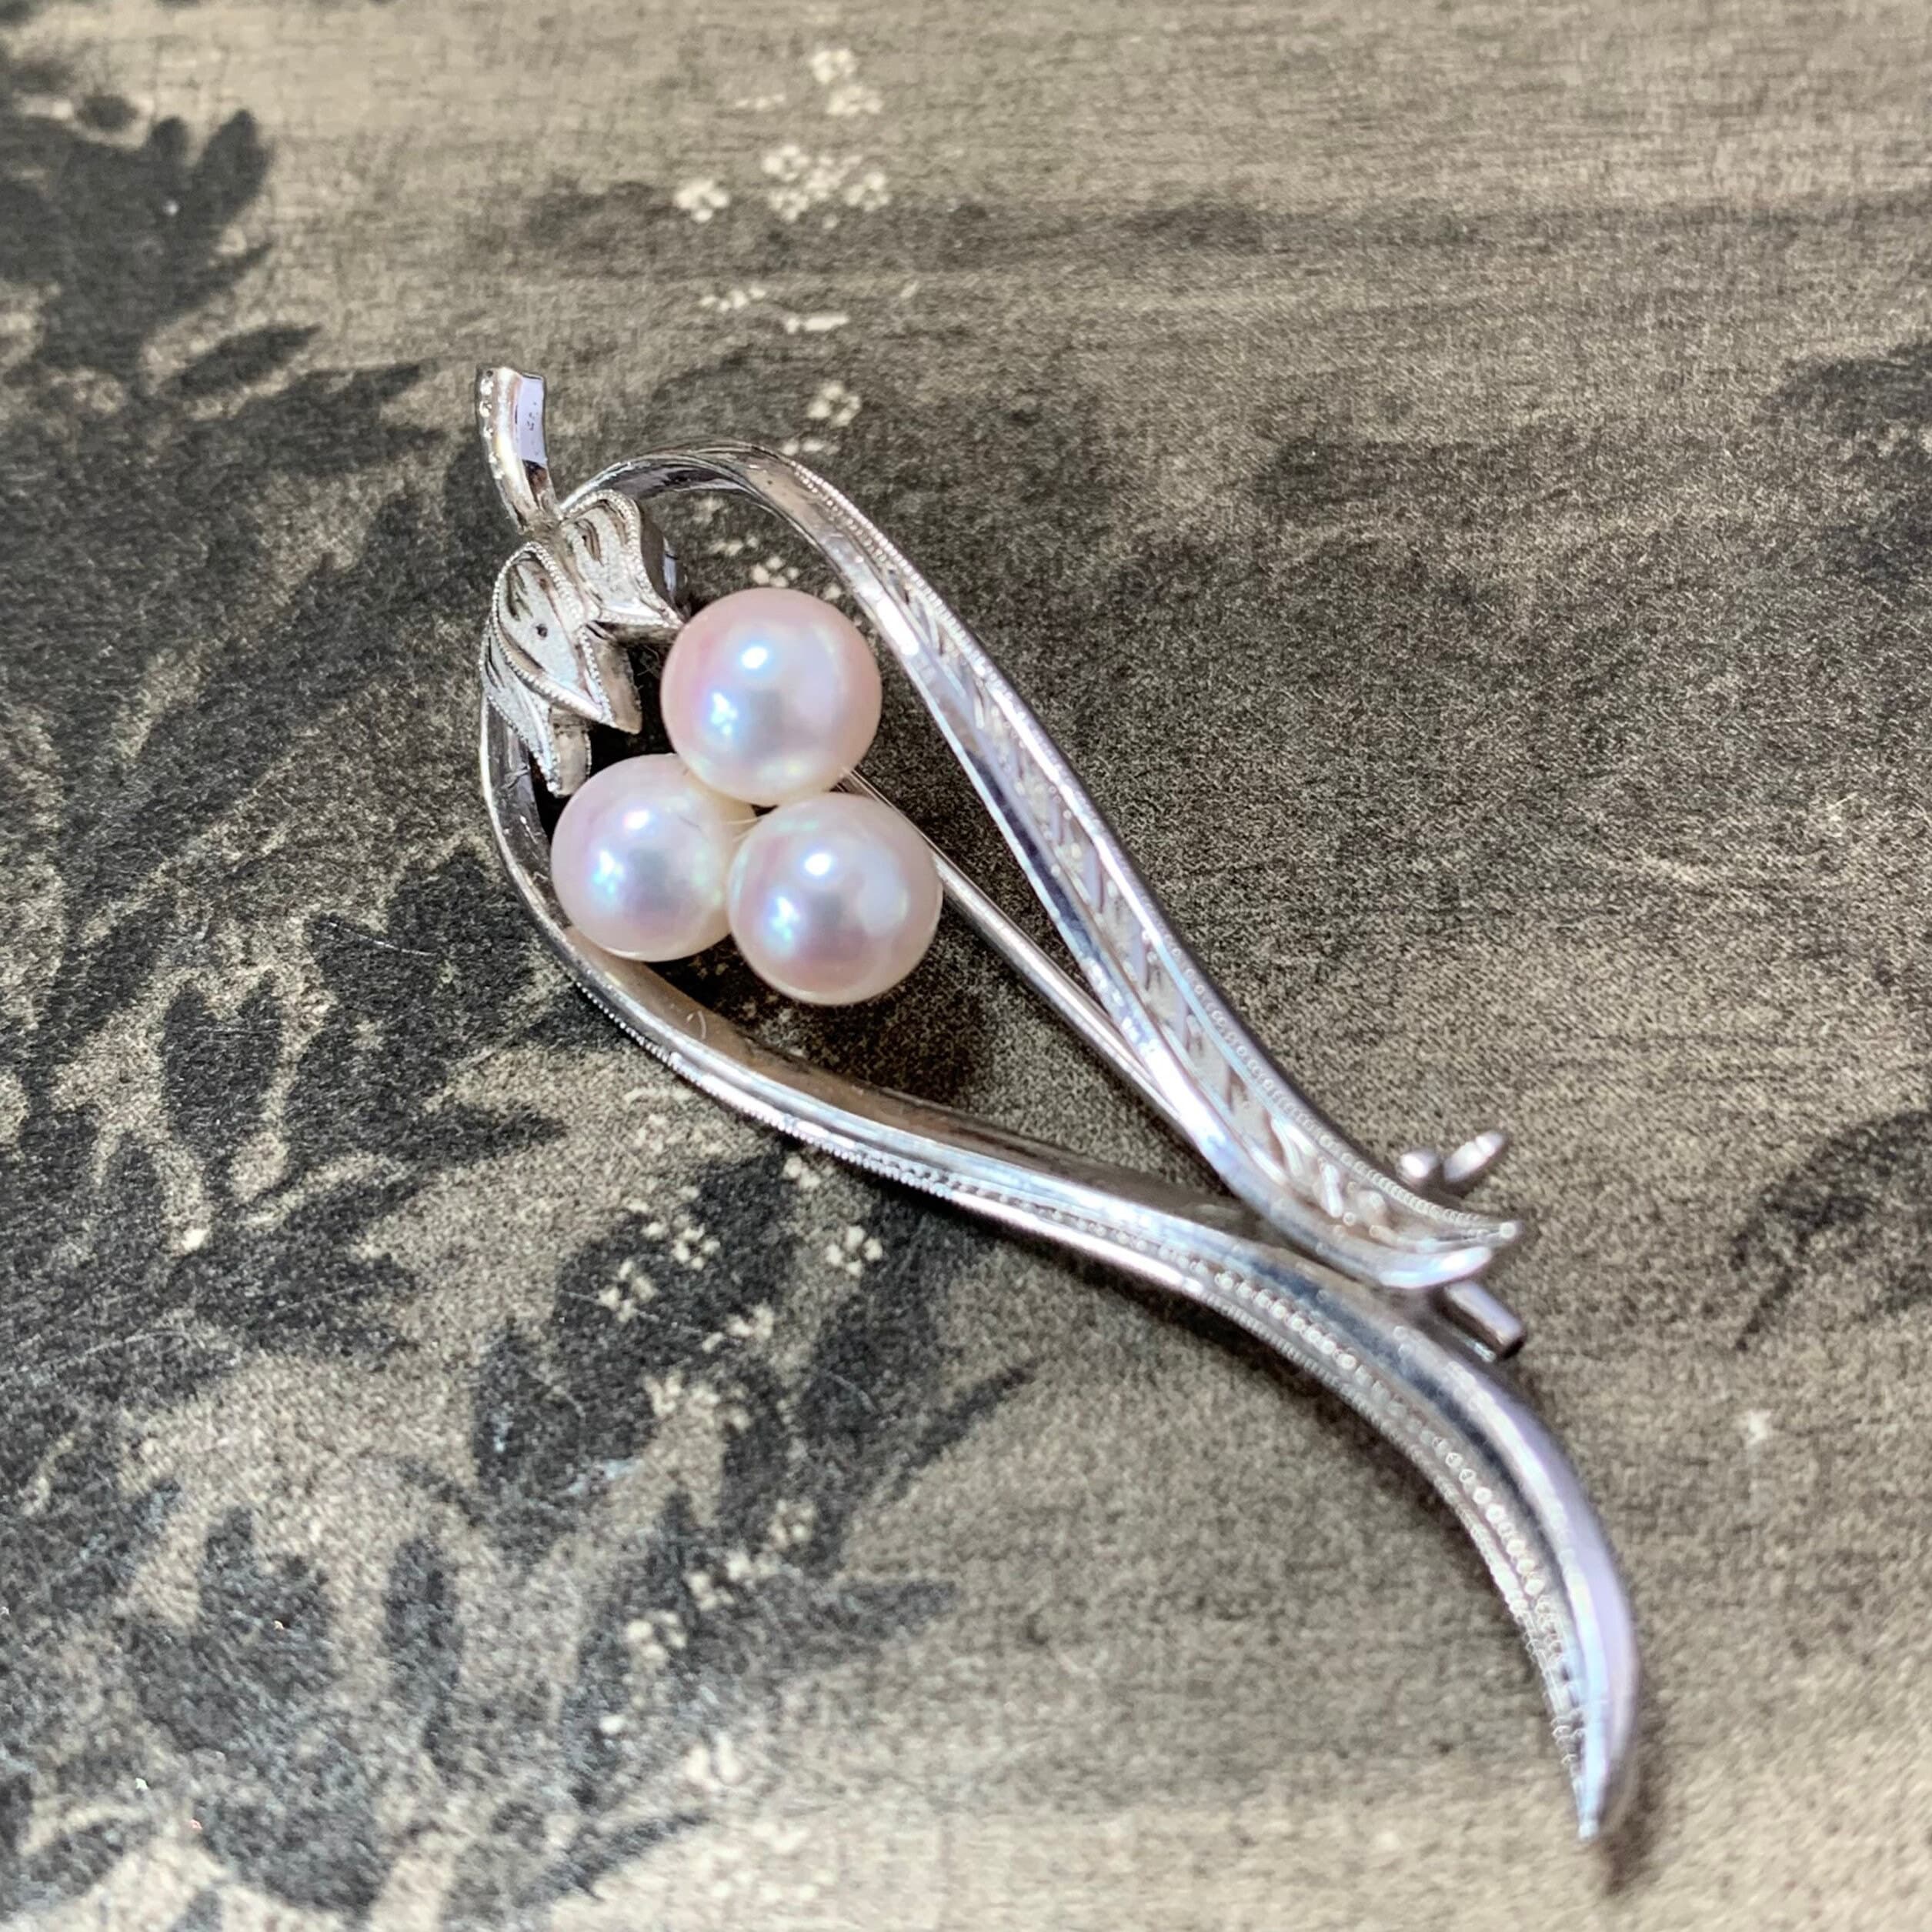 An Earlier Signed Example From Mikimoto. A Small Very Fine Silver Brooch With 3 Stunning Pink Toned Perfect & Pristine Akoya Pearls